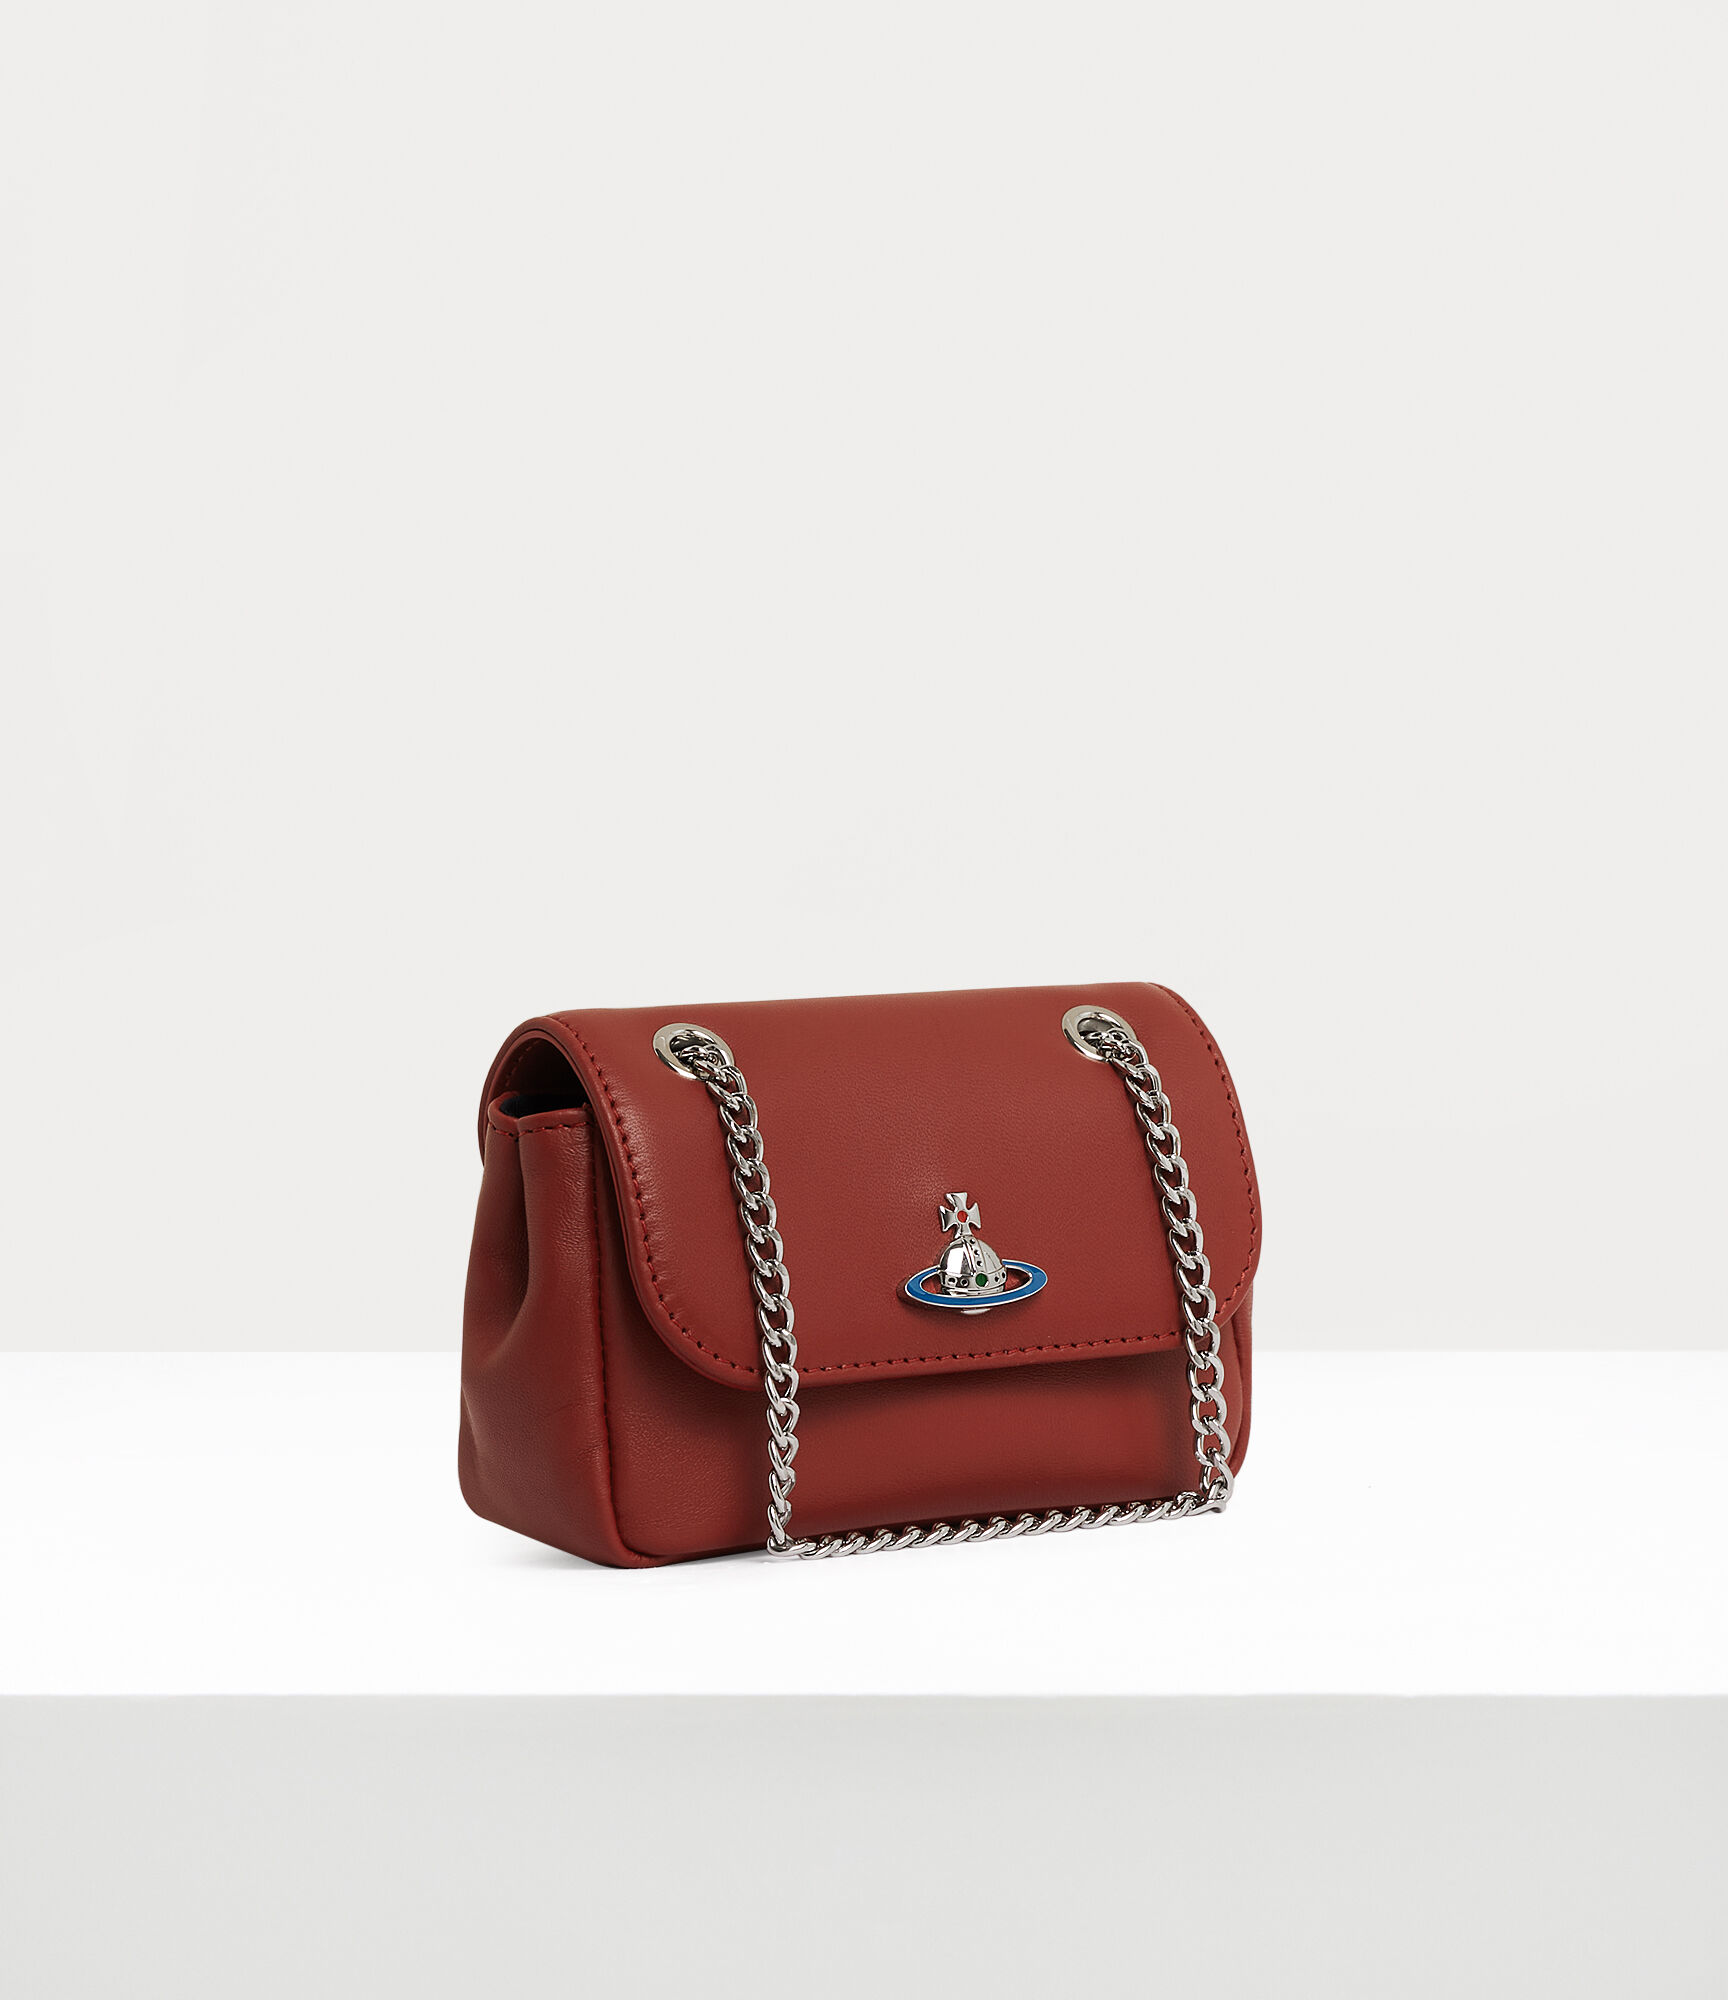 Granny Small velvet clutch in red - Vivienne Westwood | Mytheresa